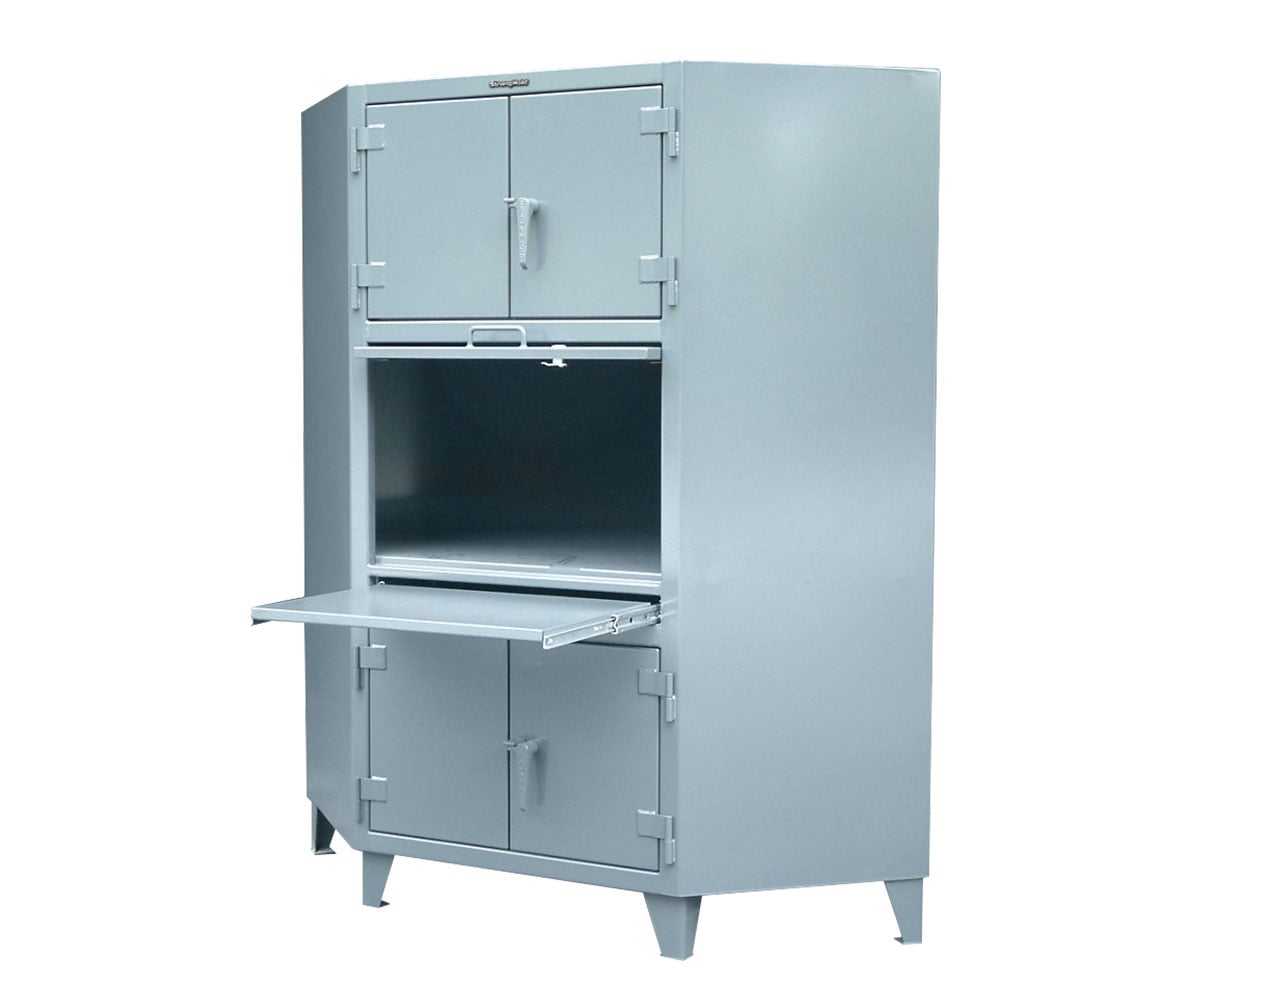 Extreme Duty 12 GA Corner Cabinet with Slide-Out Shelf, 2 Shelves, Lift-Up Door - 48 In. W x 24 In. D x 78 In. H